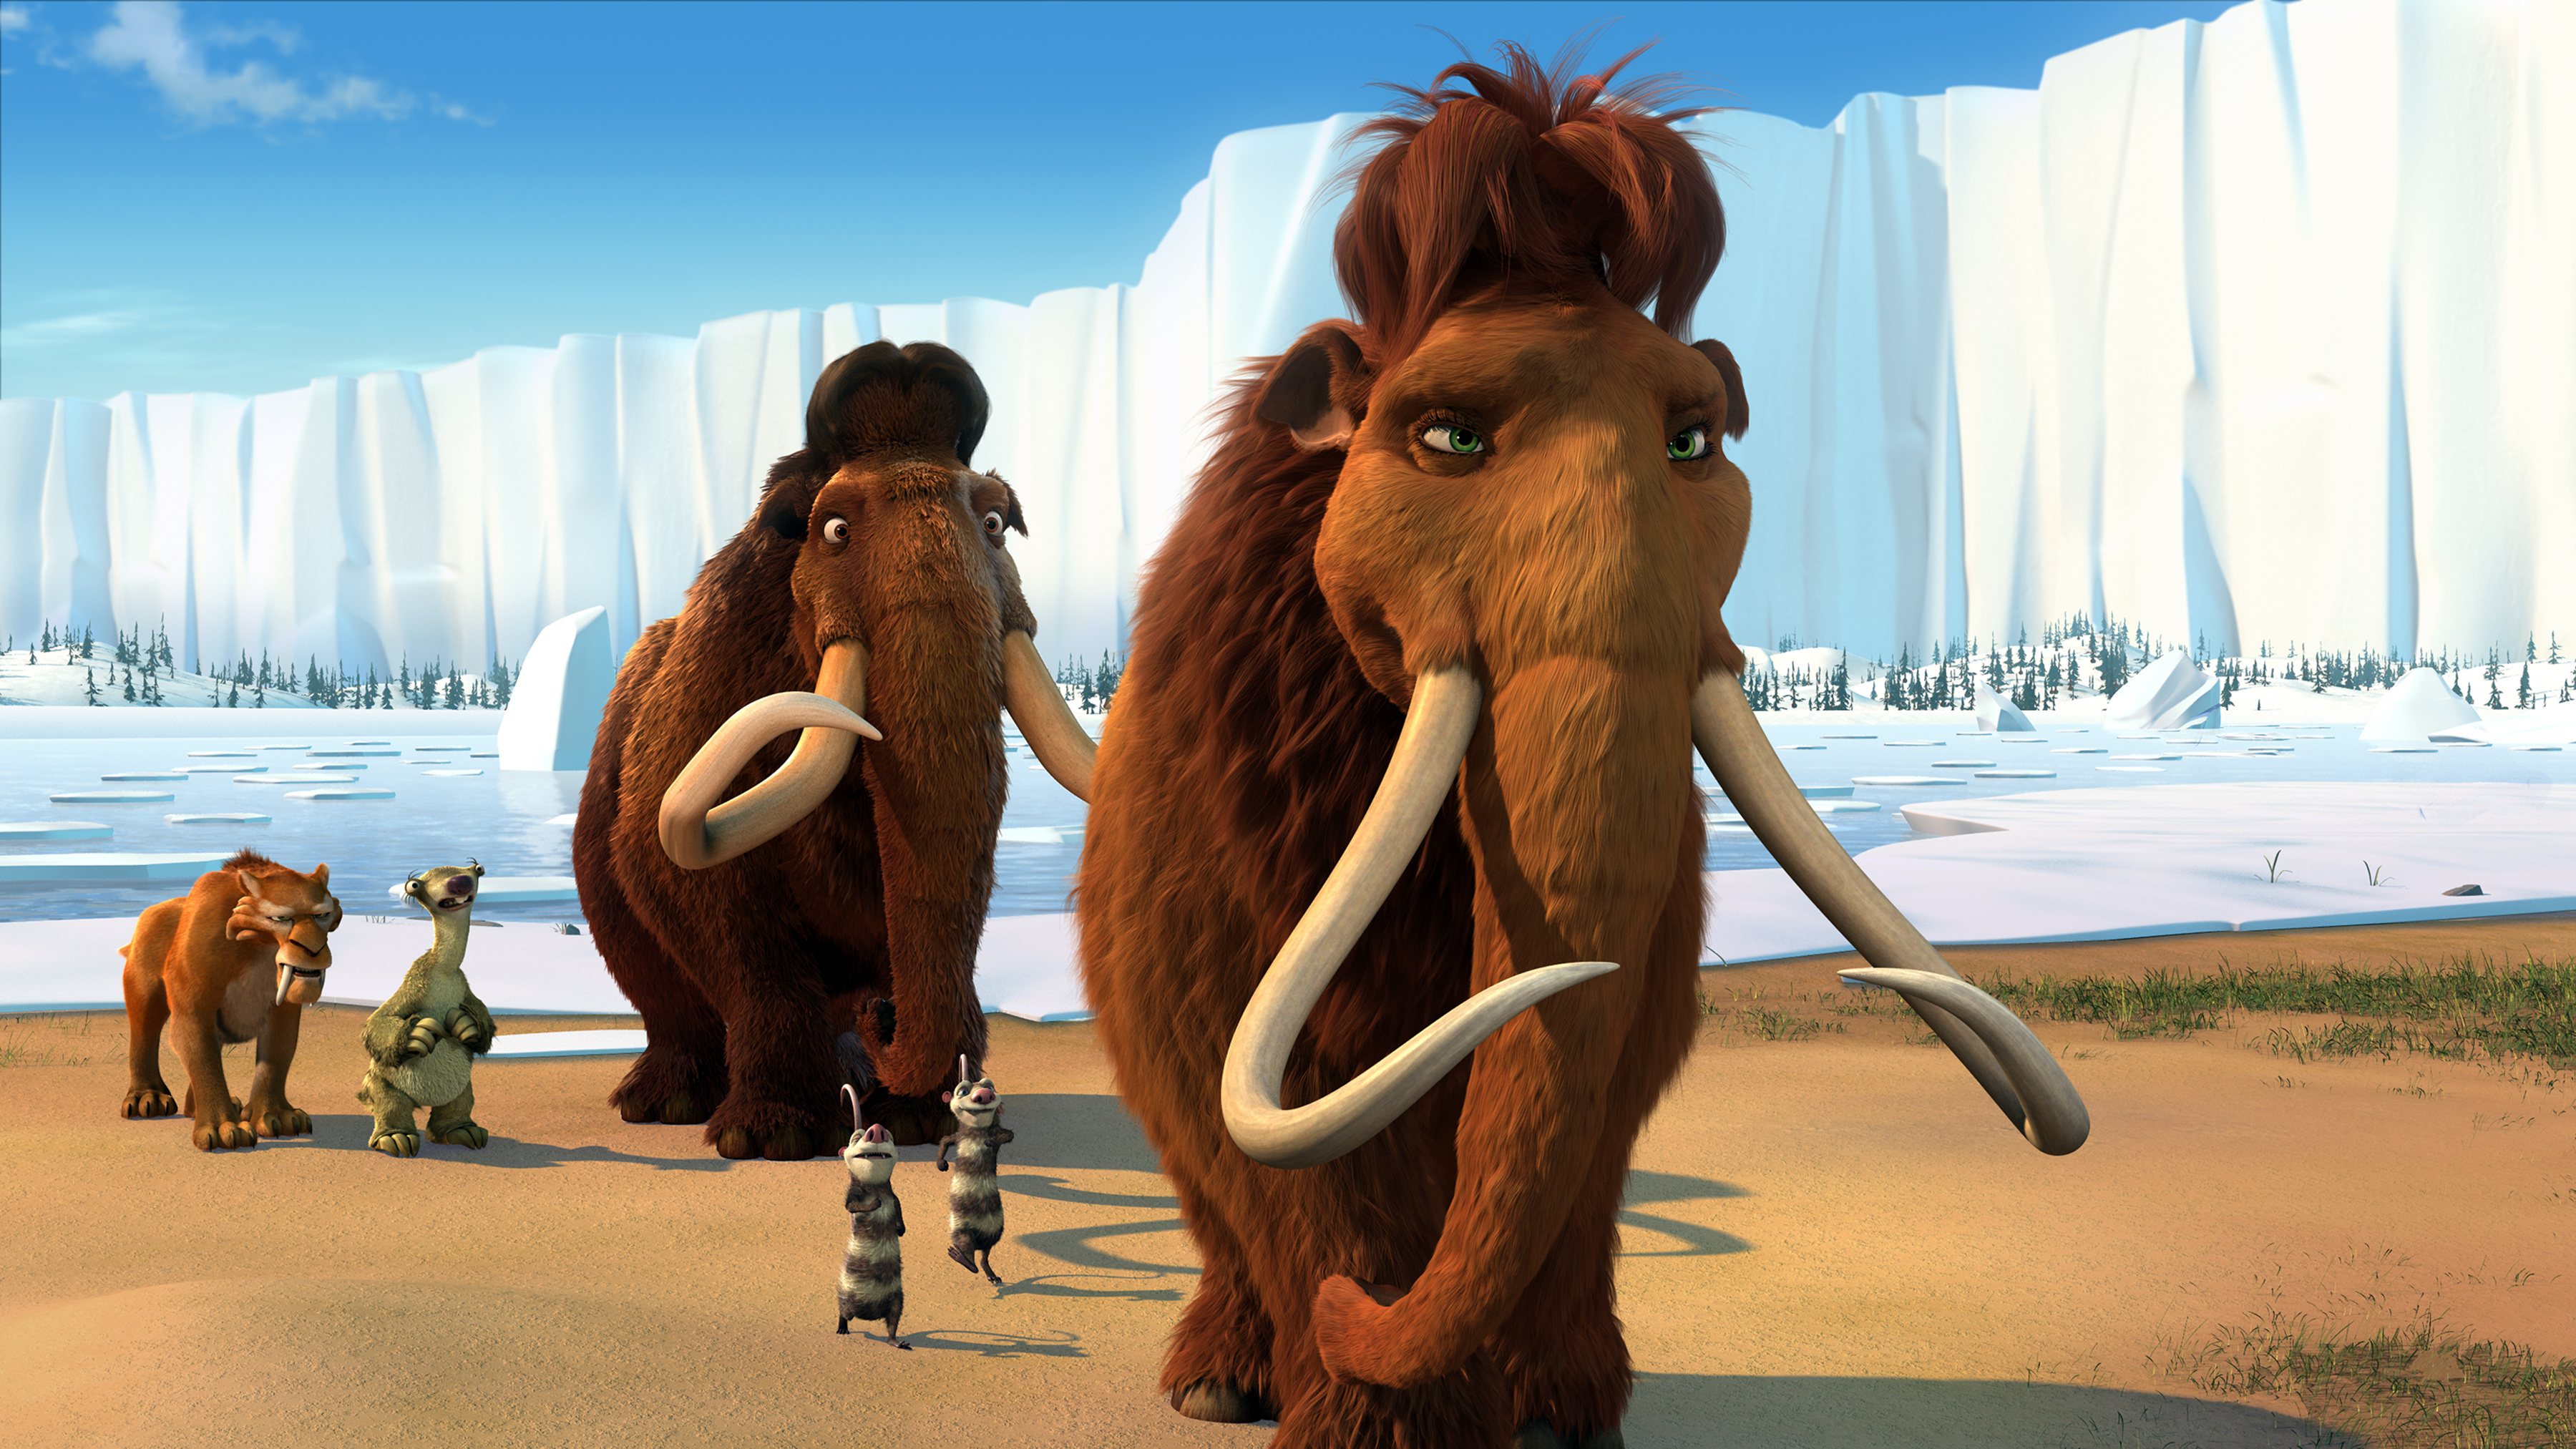 HD Quality Wallpaper | Collection: Movie, 3600x2025 Ice Age: The Meltdown